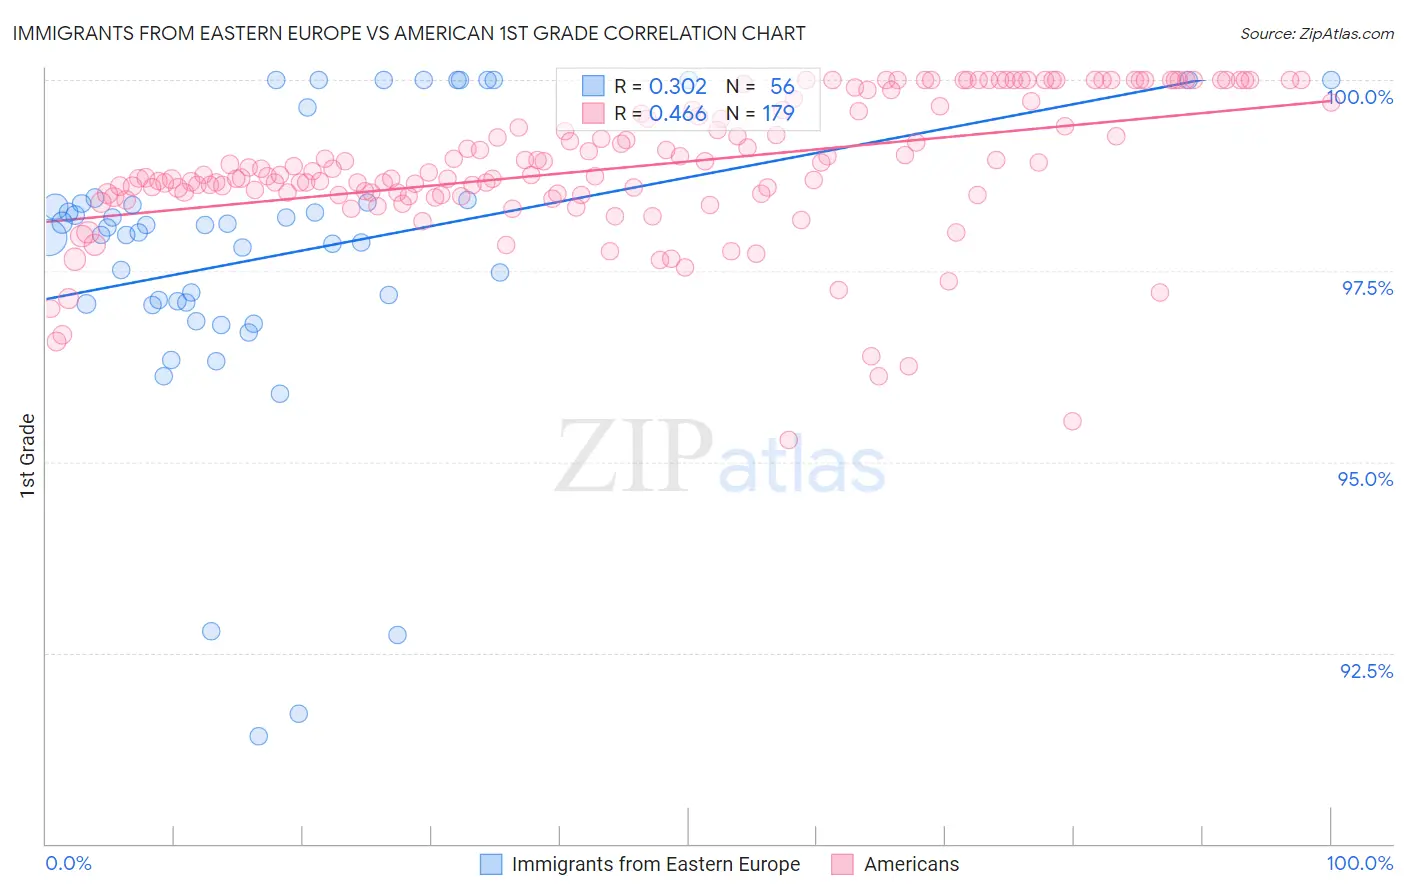 Immigrants from Eastern Europe vs American 1st Grade